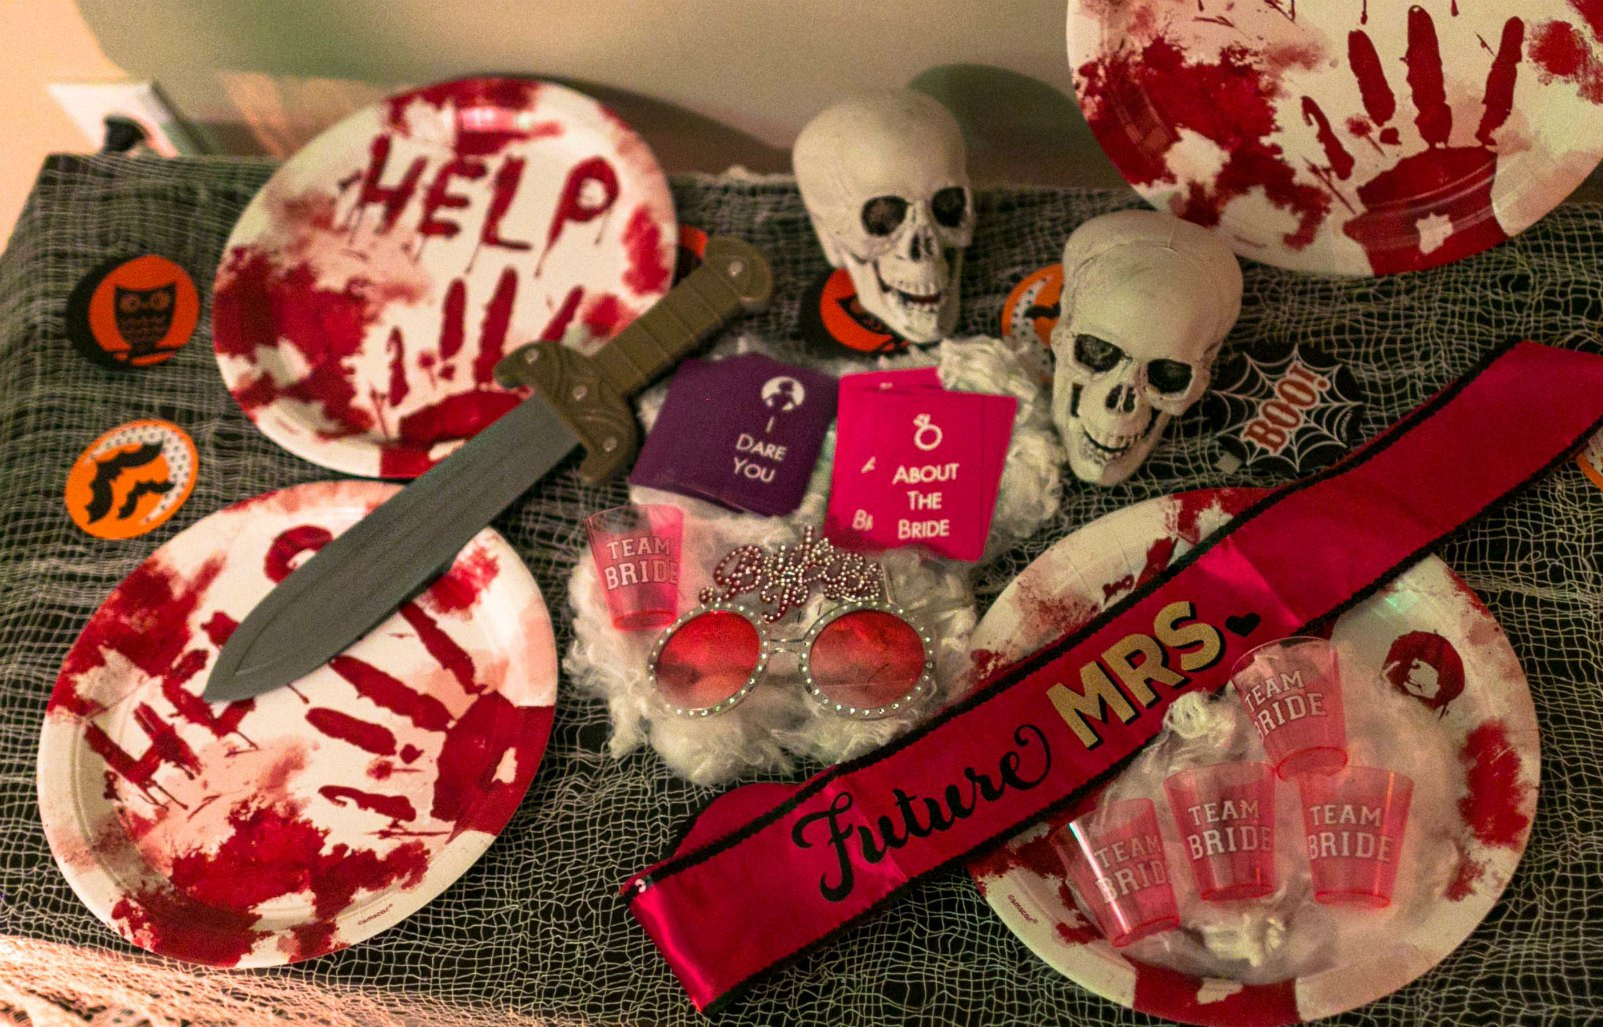 Halloween Bachelorette Party Ideas
 Top 5 Scary Fun Halloween Bachelorette Party Ideas